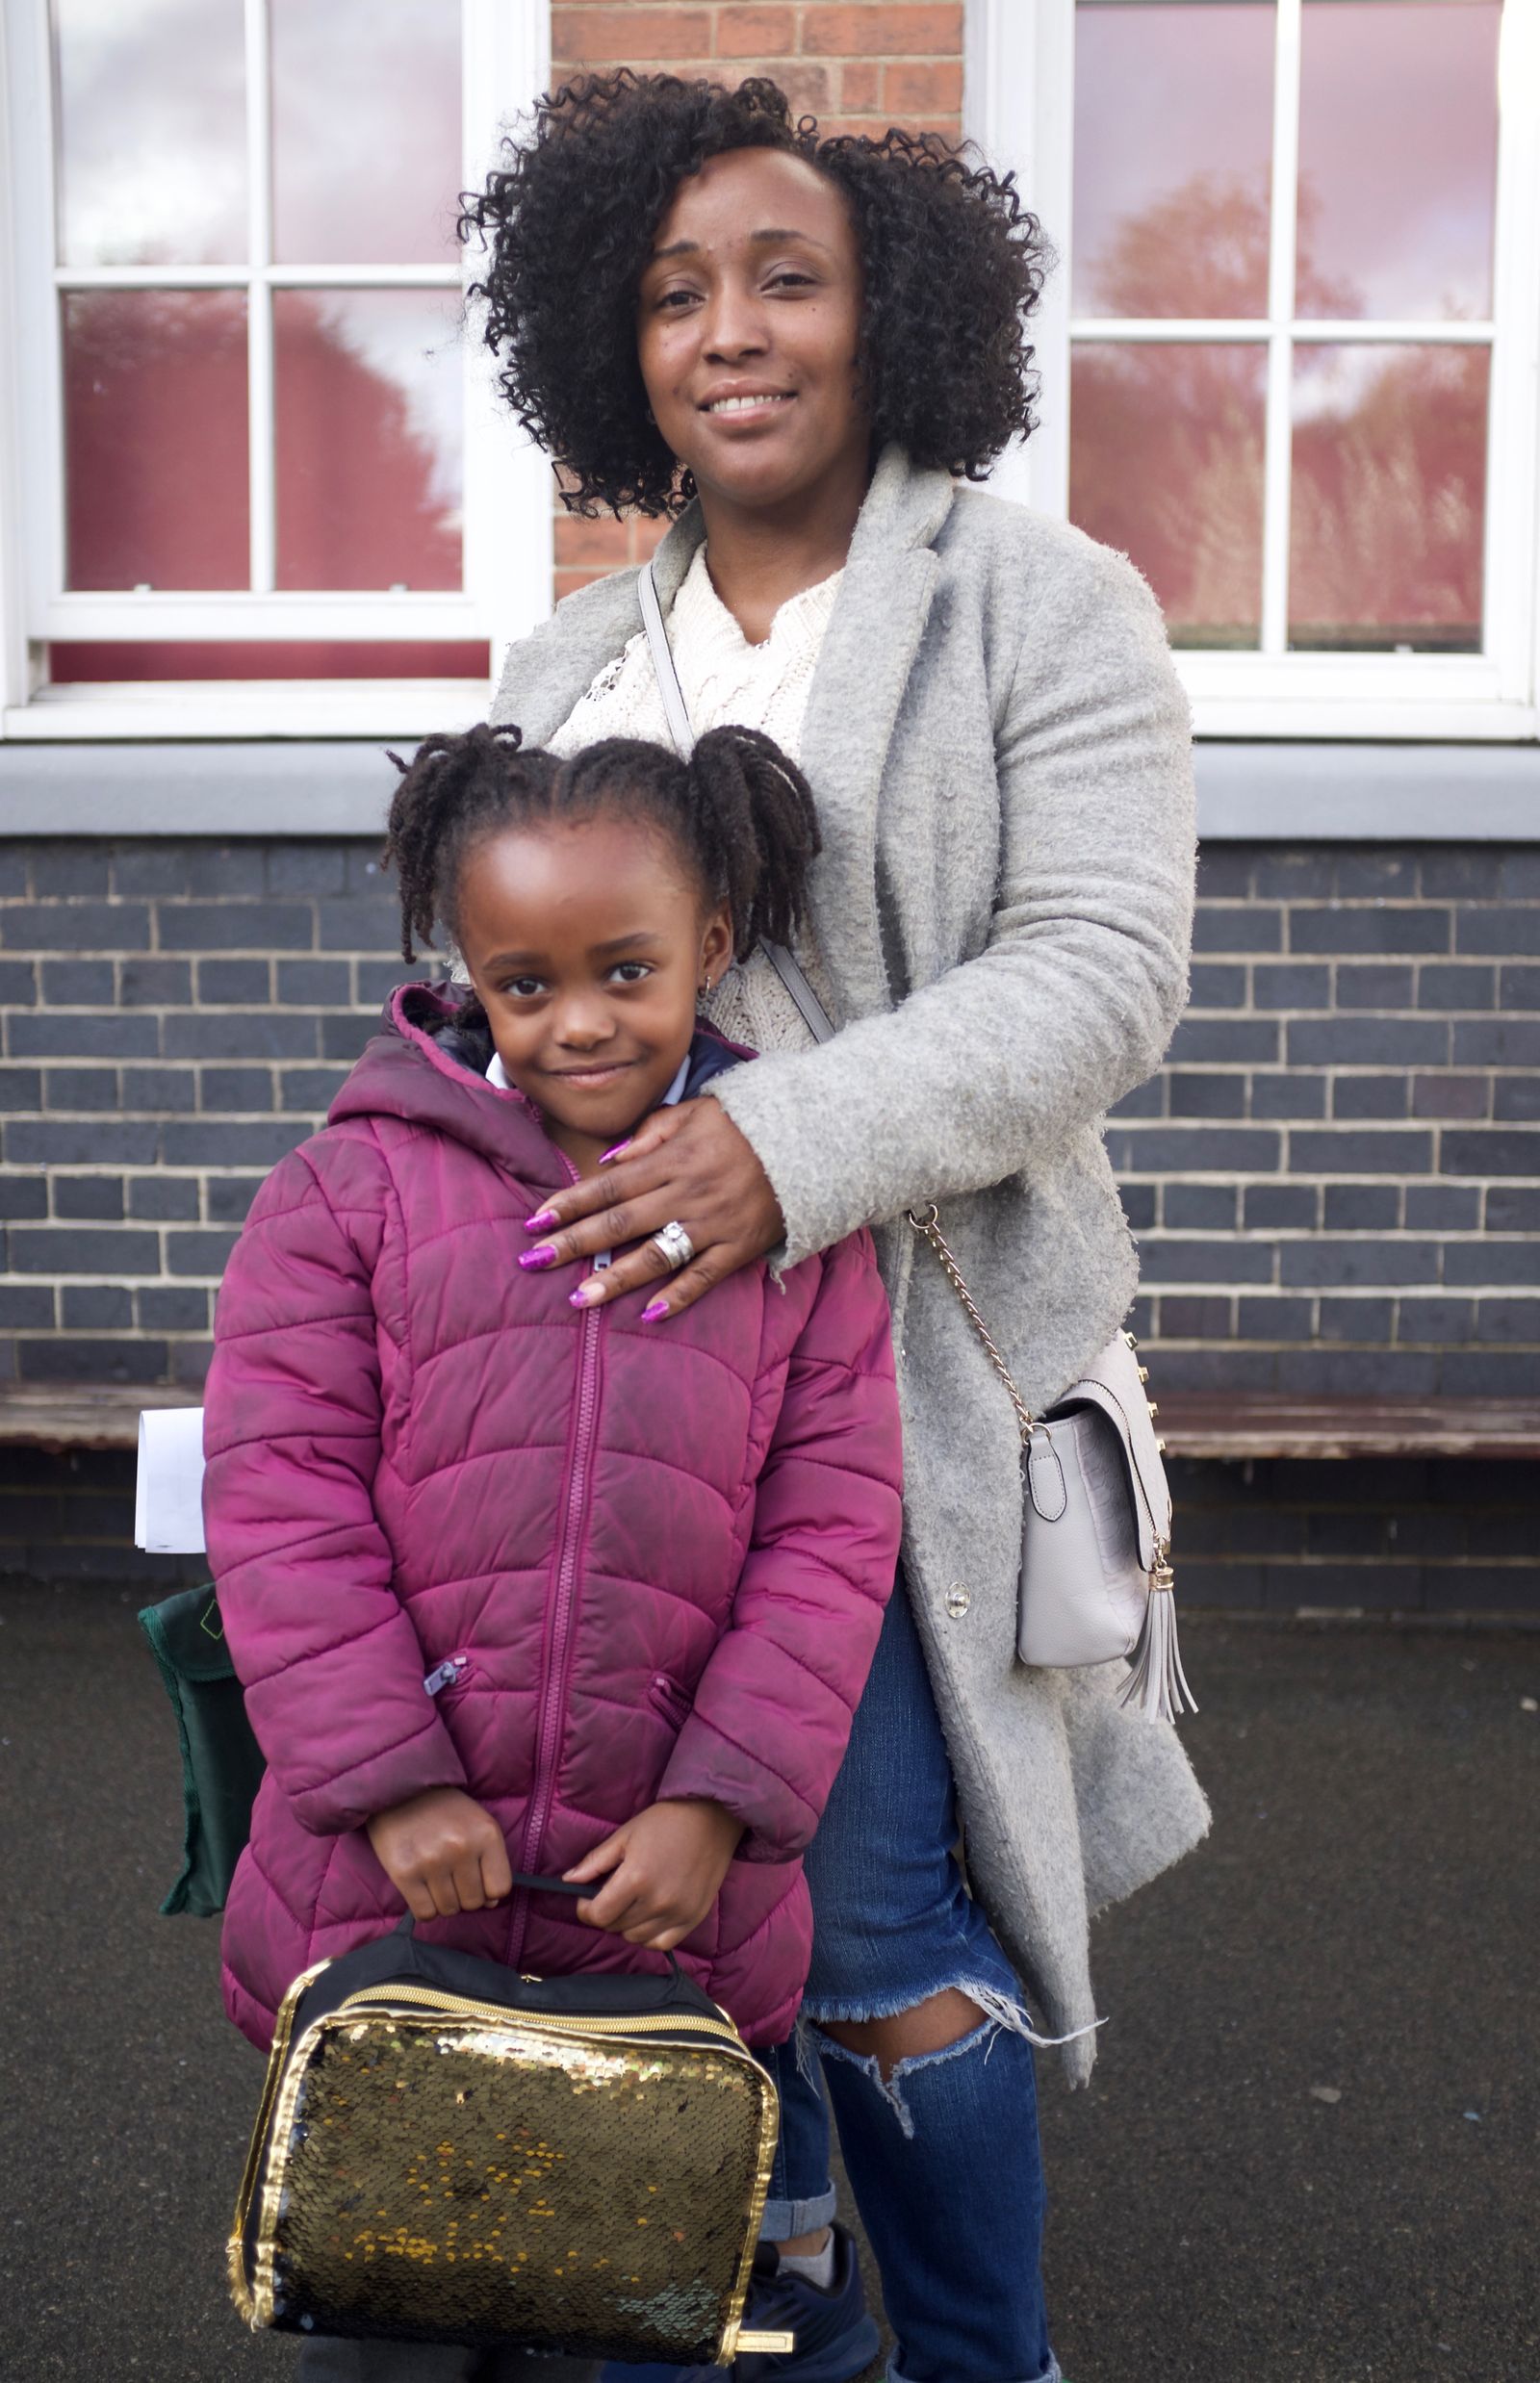 © Manal Massalha - Image from the A School in hackney - East London photography project